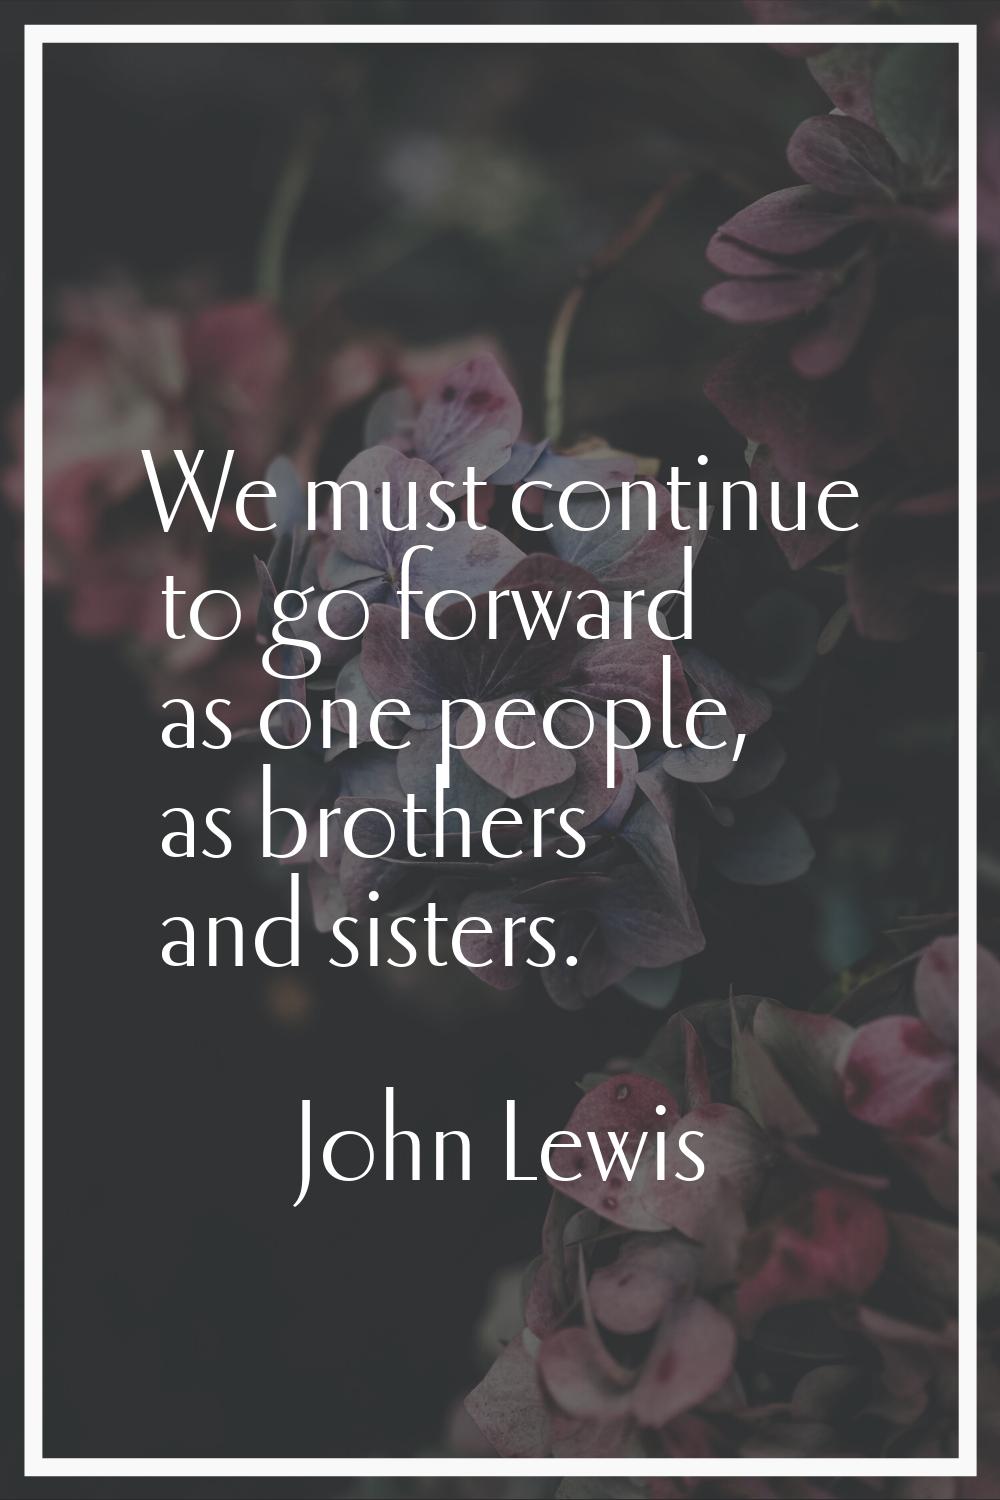 We must continue to go forward as one people, as brothers and sisters.